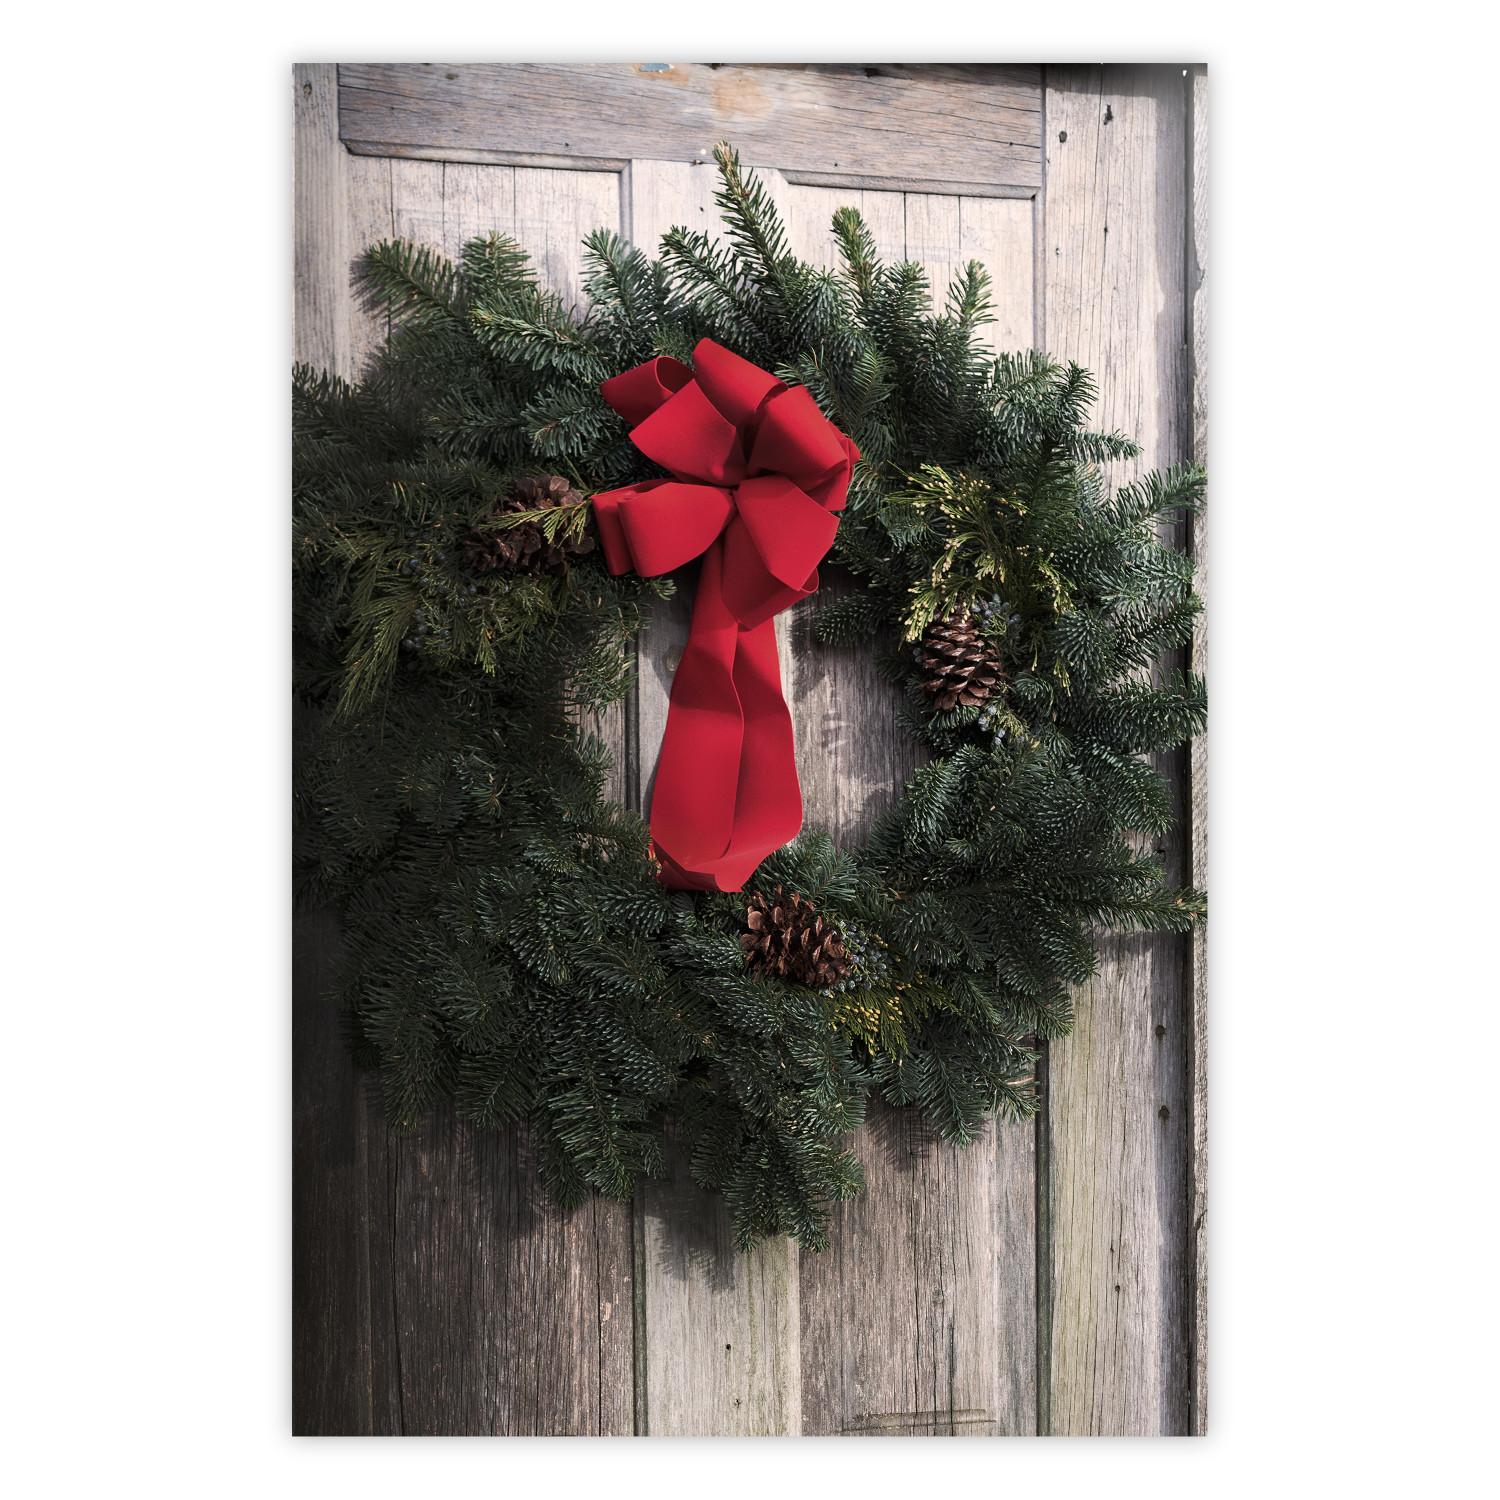 Poster Christmas Wreath - round spruce decoration hung on the door